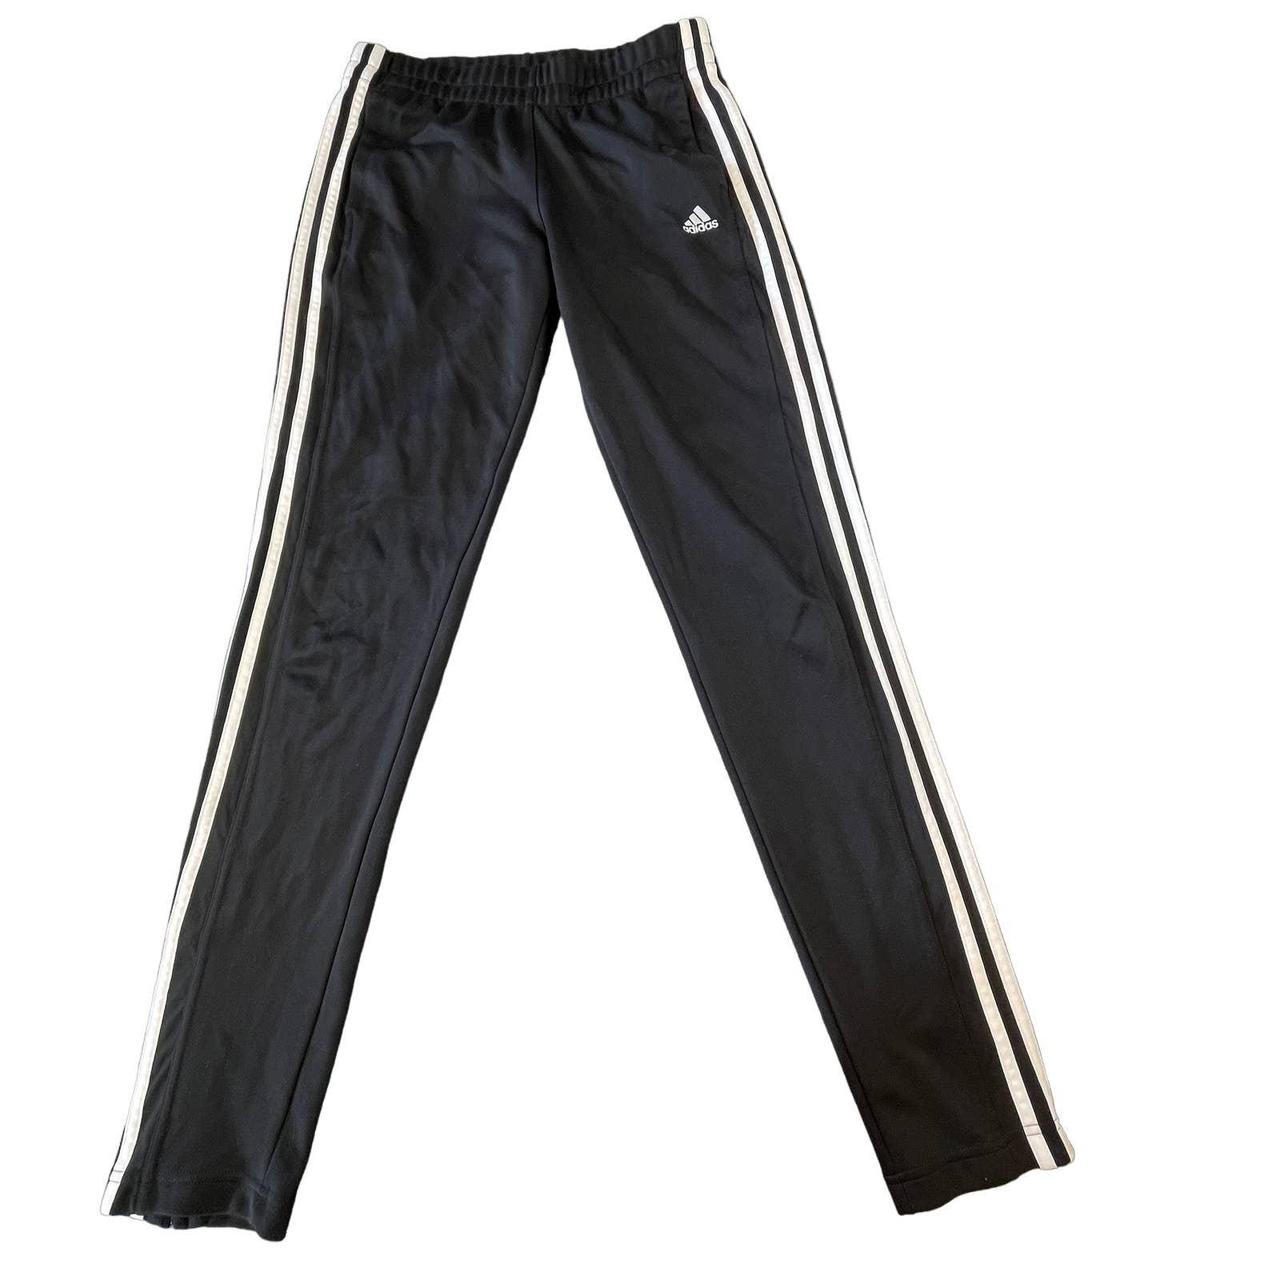 Authentic) Adidas Climalite Jogger Pants | Shopee Philippines